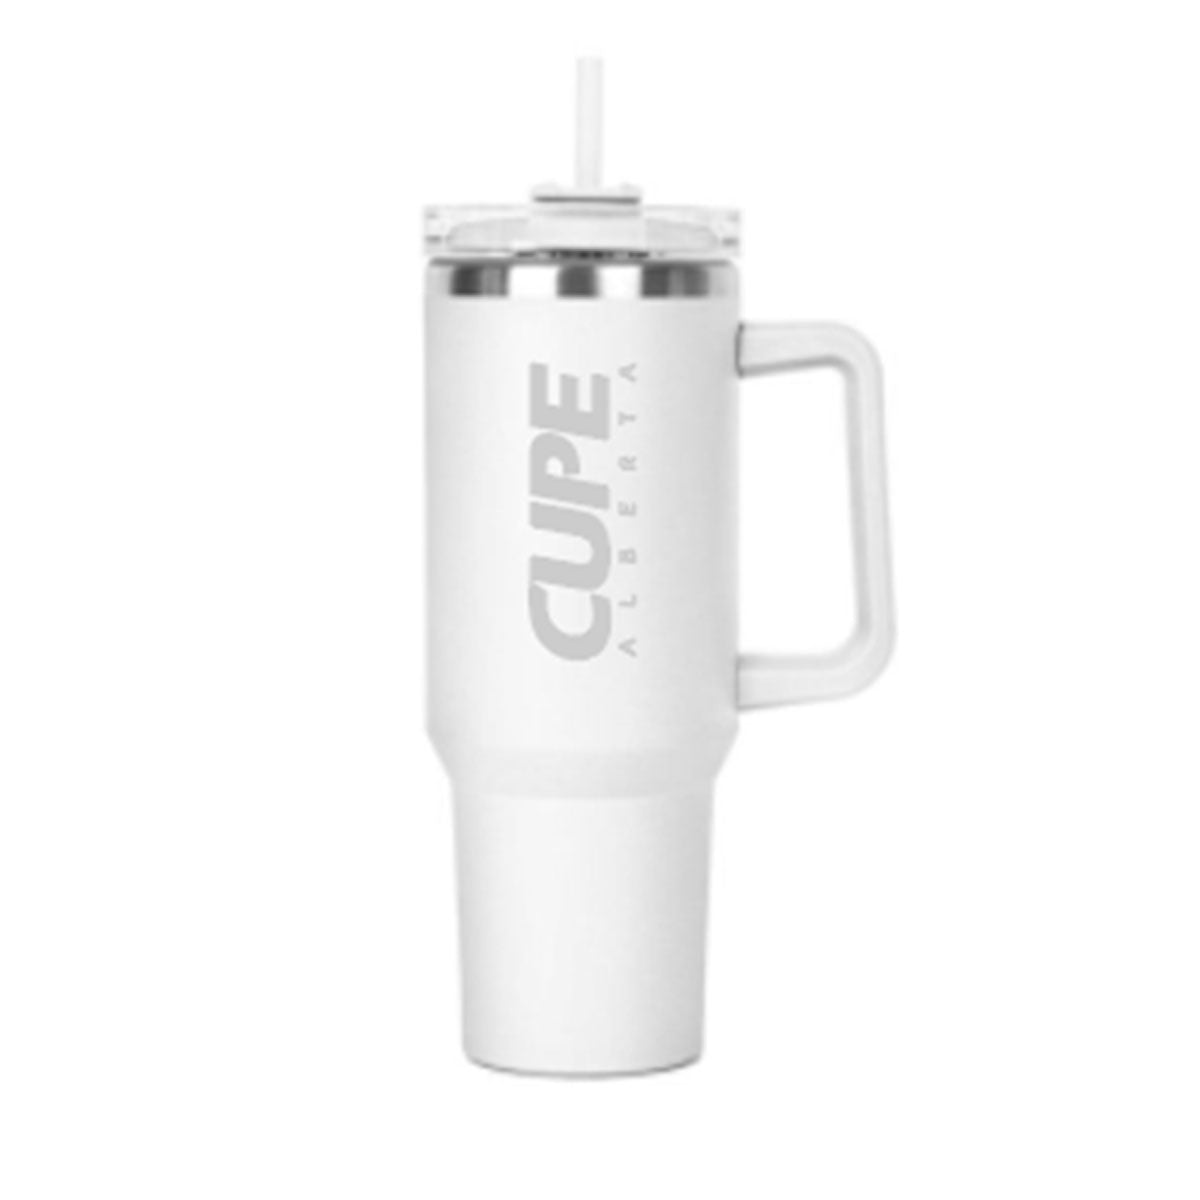 40oz Large Insulated Tumber- CUPE Alberta